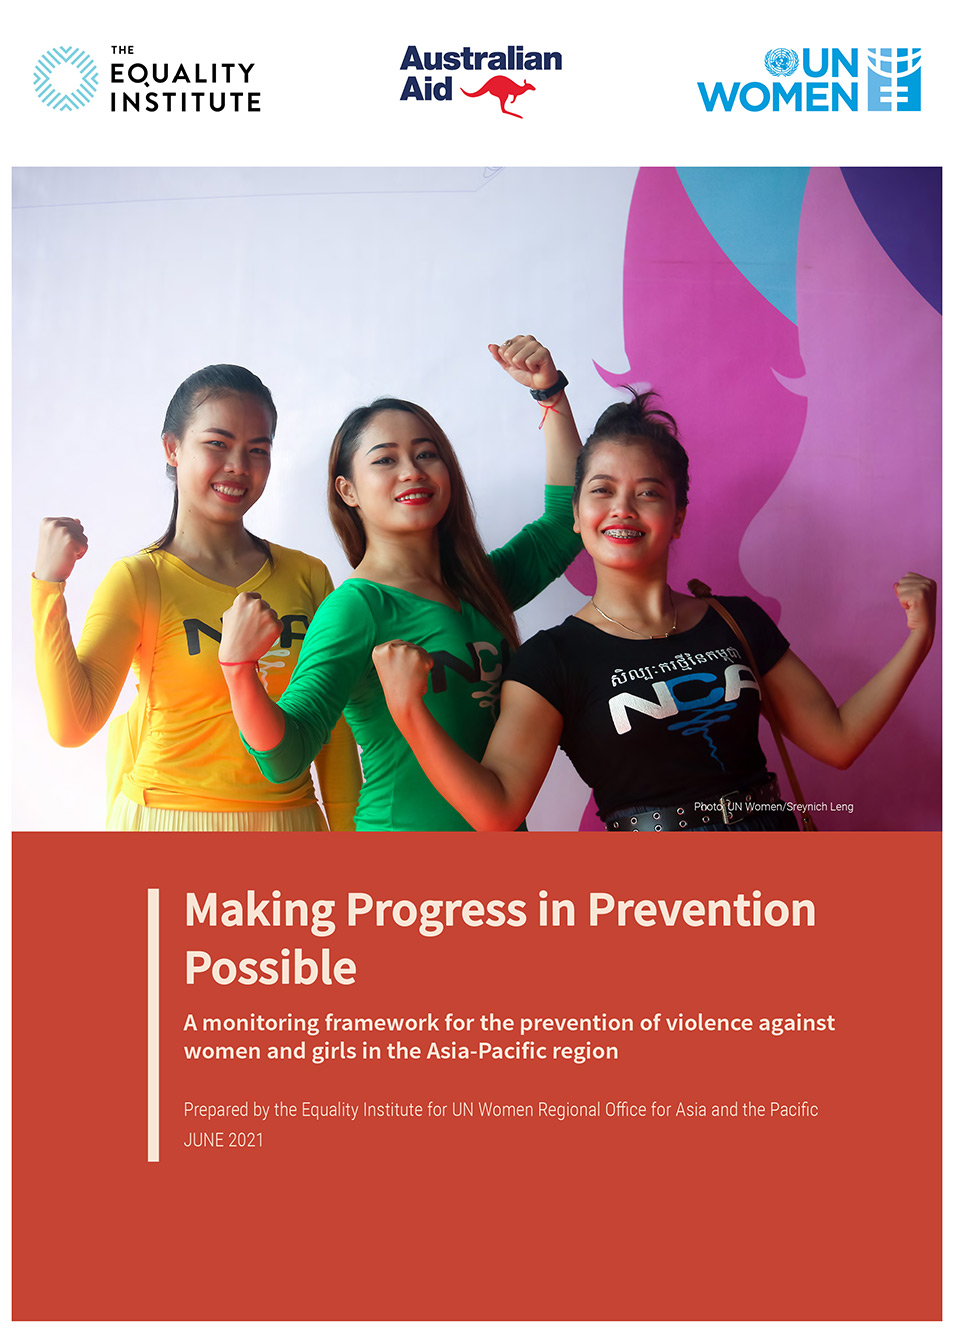 Making Progress in Prevention Possible